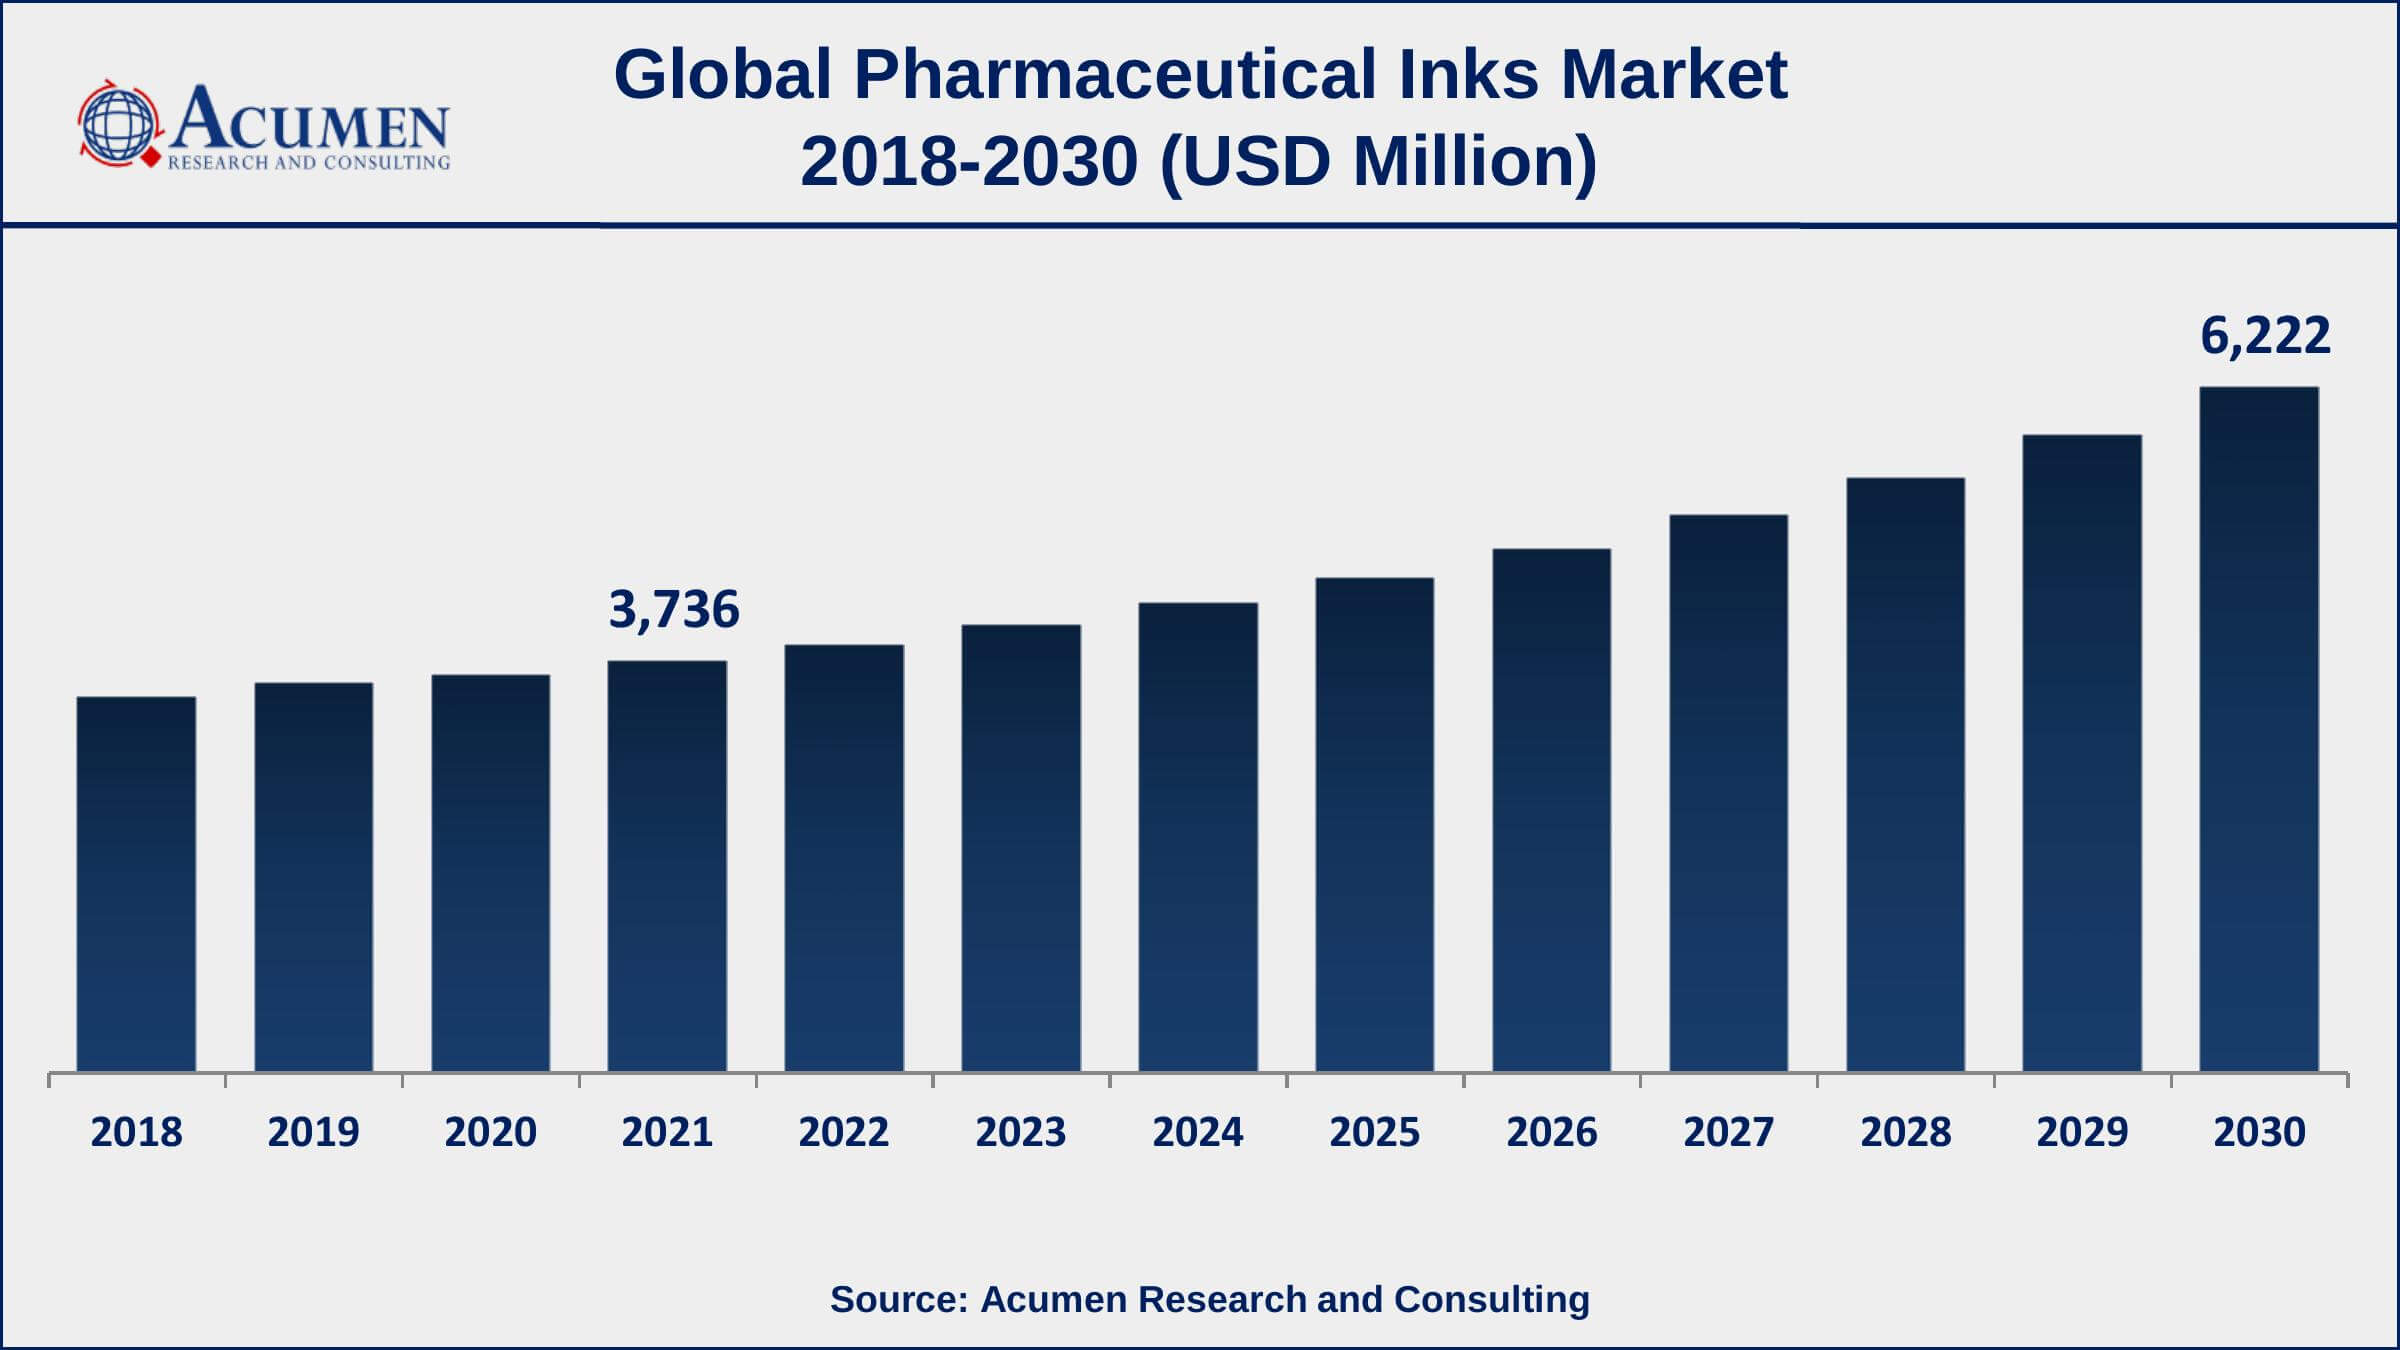 Europe and Asia-Pacific pharmaceutical inks market growth will observe strongest CAGR from 2022 to 2030